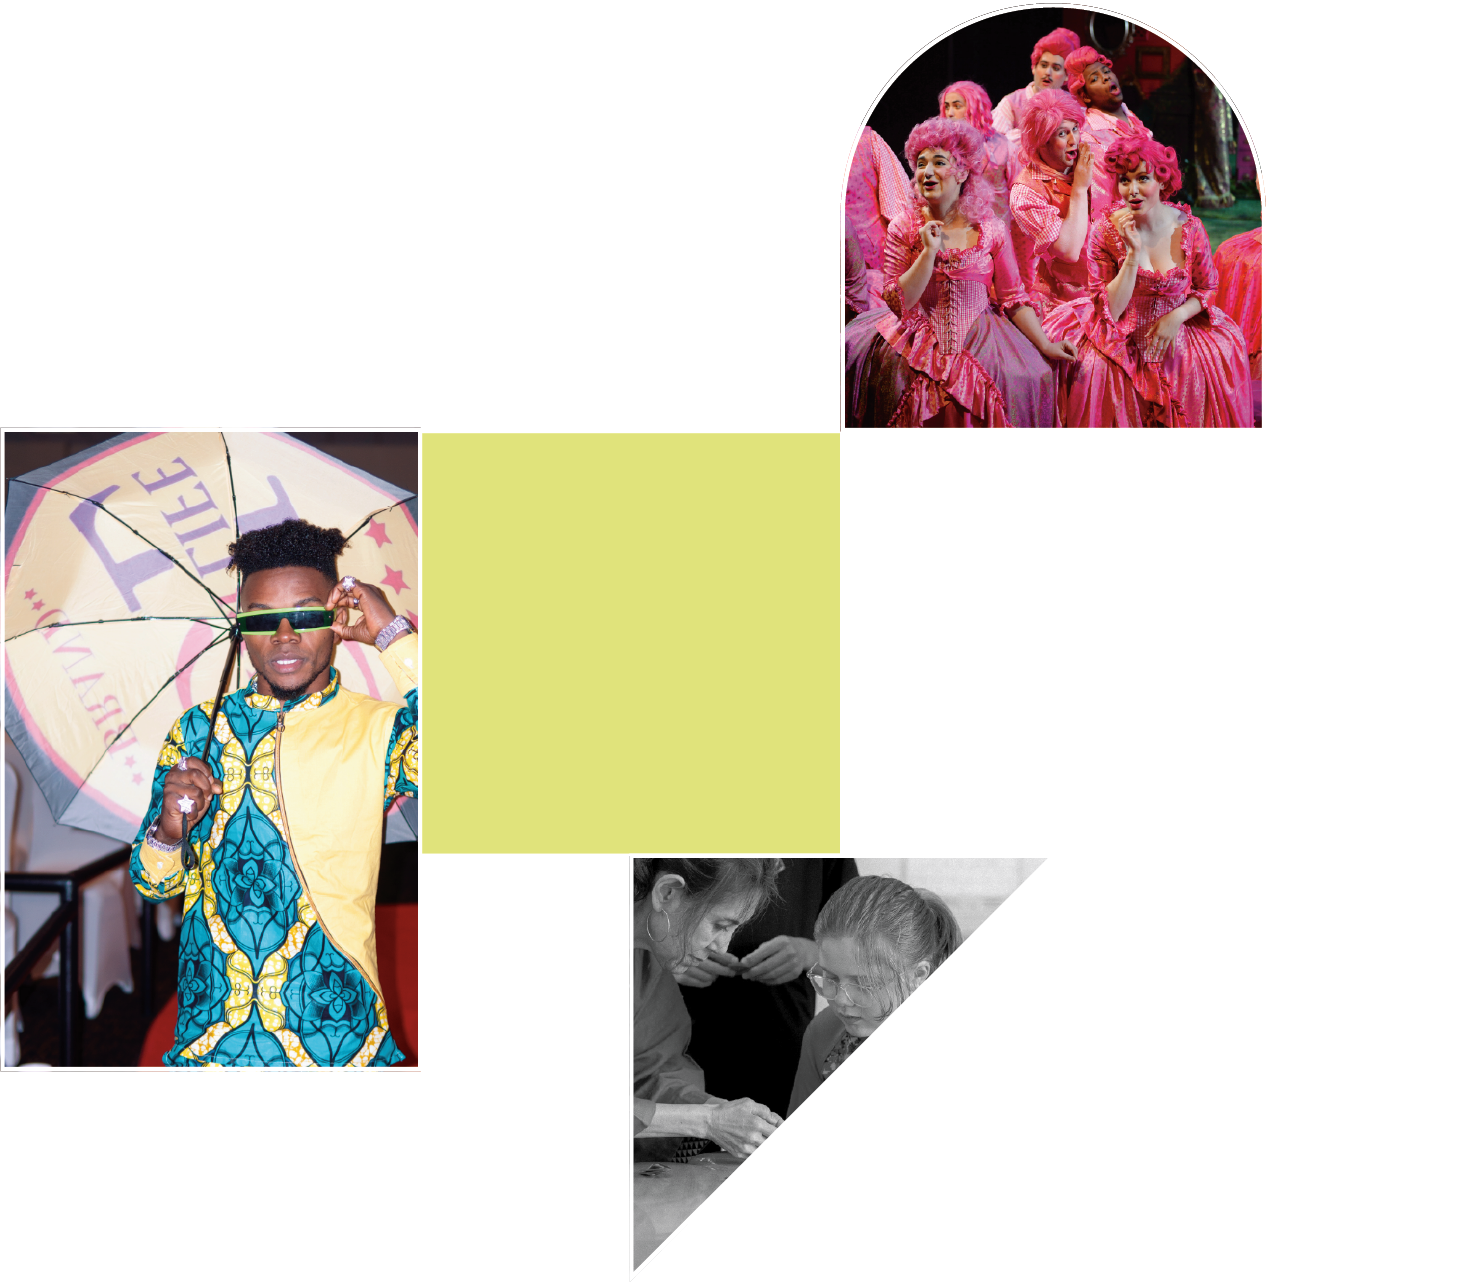 A white geometric line pattern containing three photographs: a group of performers at the Des Moines Metro Opera, a man with sunglasses and an umbrella wearing colorful clothing, and a child and a teacher interacting